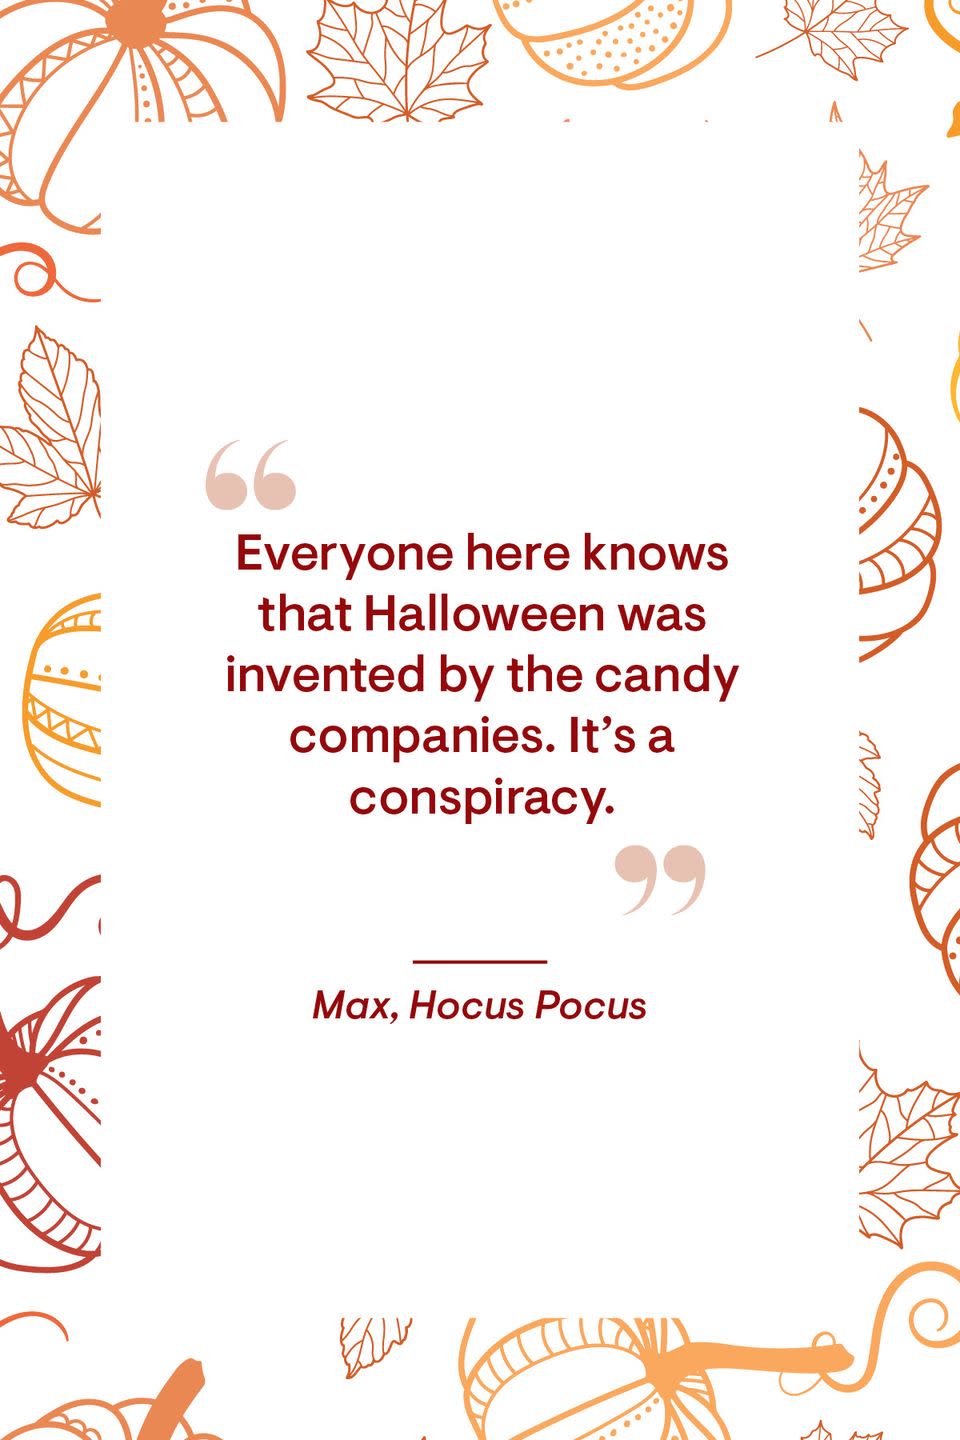 <p>“Everyone here knows that Halloween was invented by the candy companies. It’s a conspiracy.”<br></p>